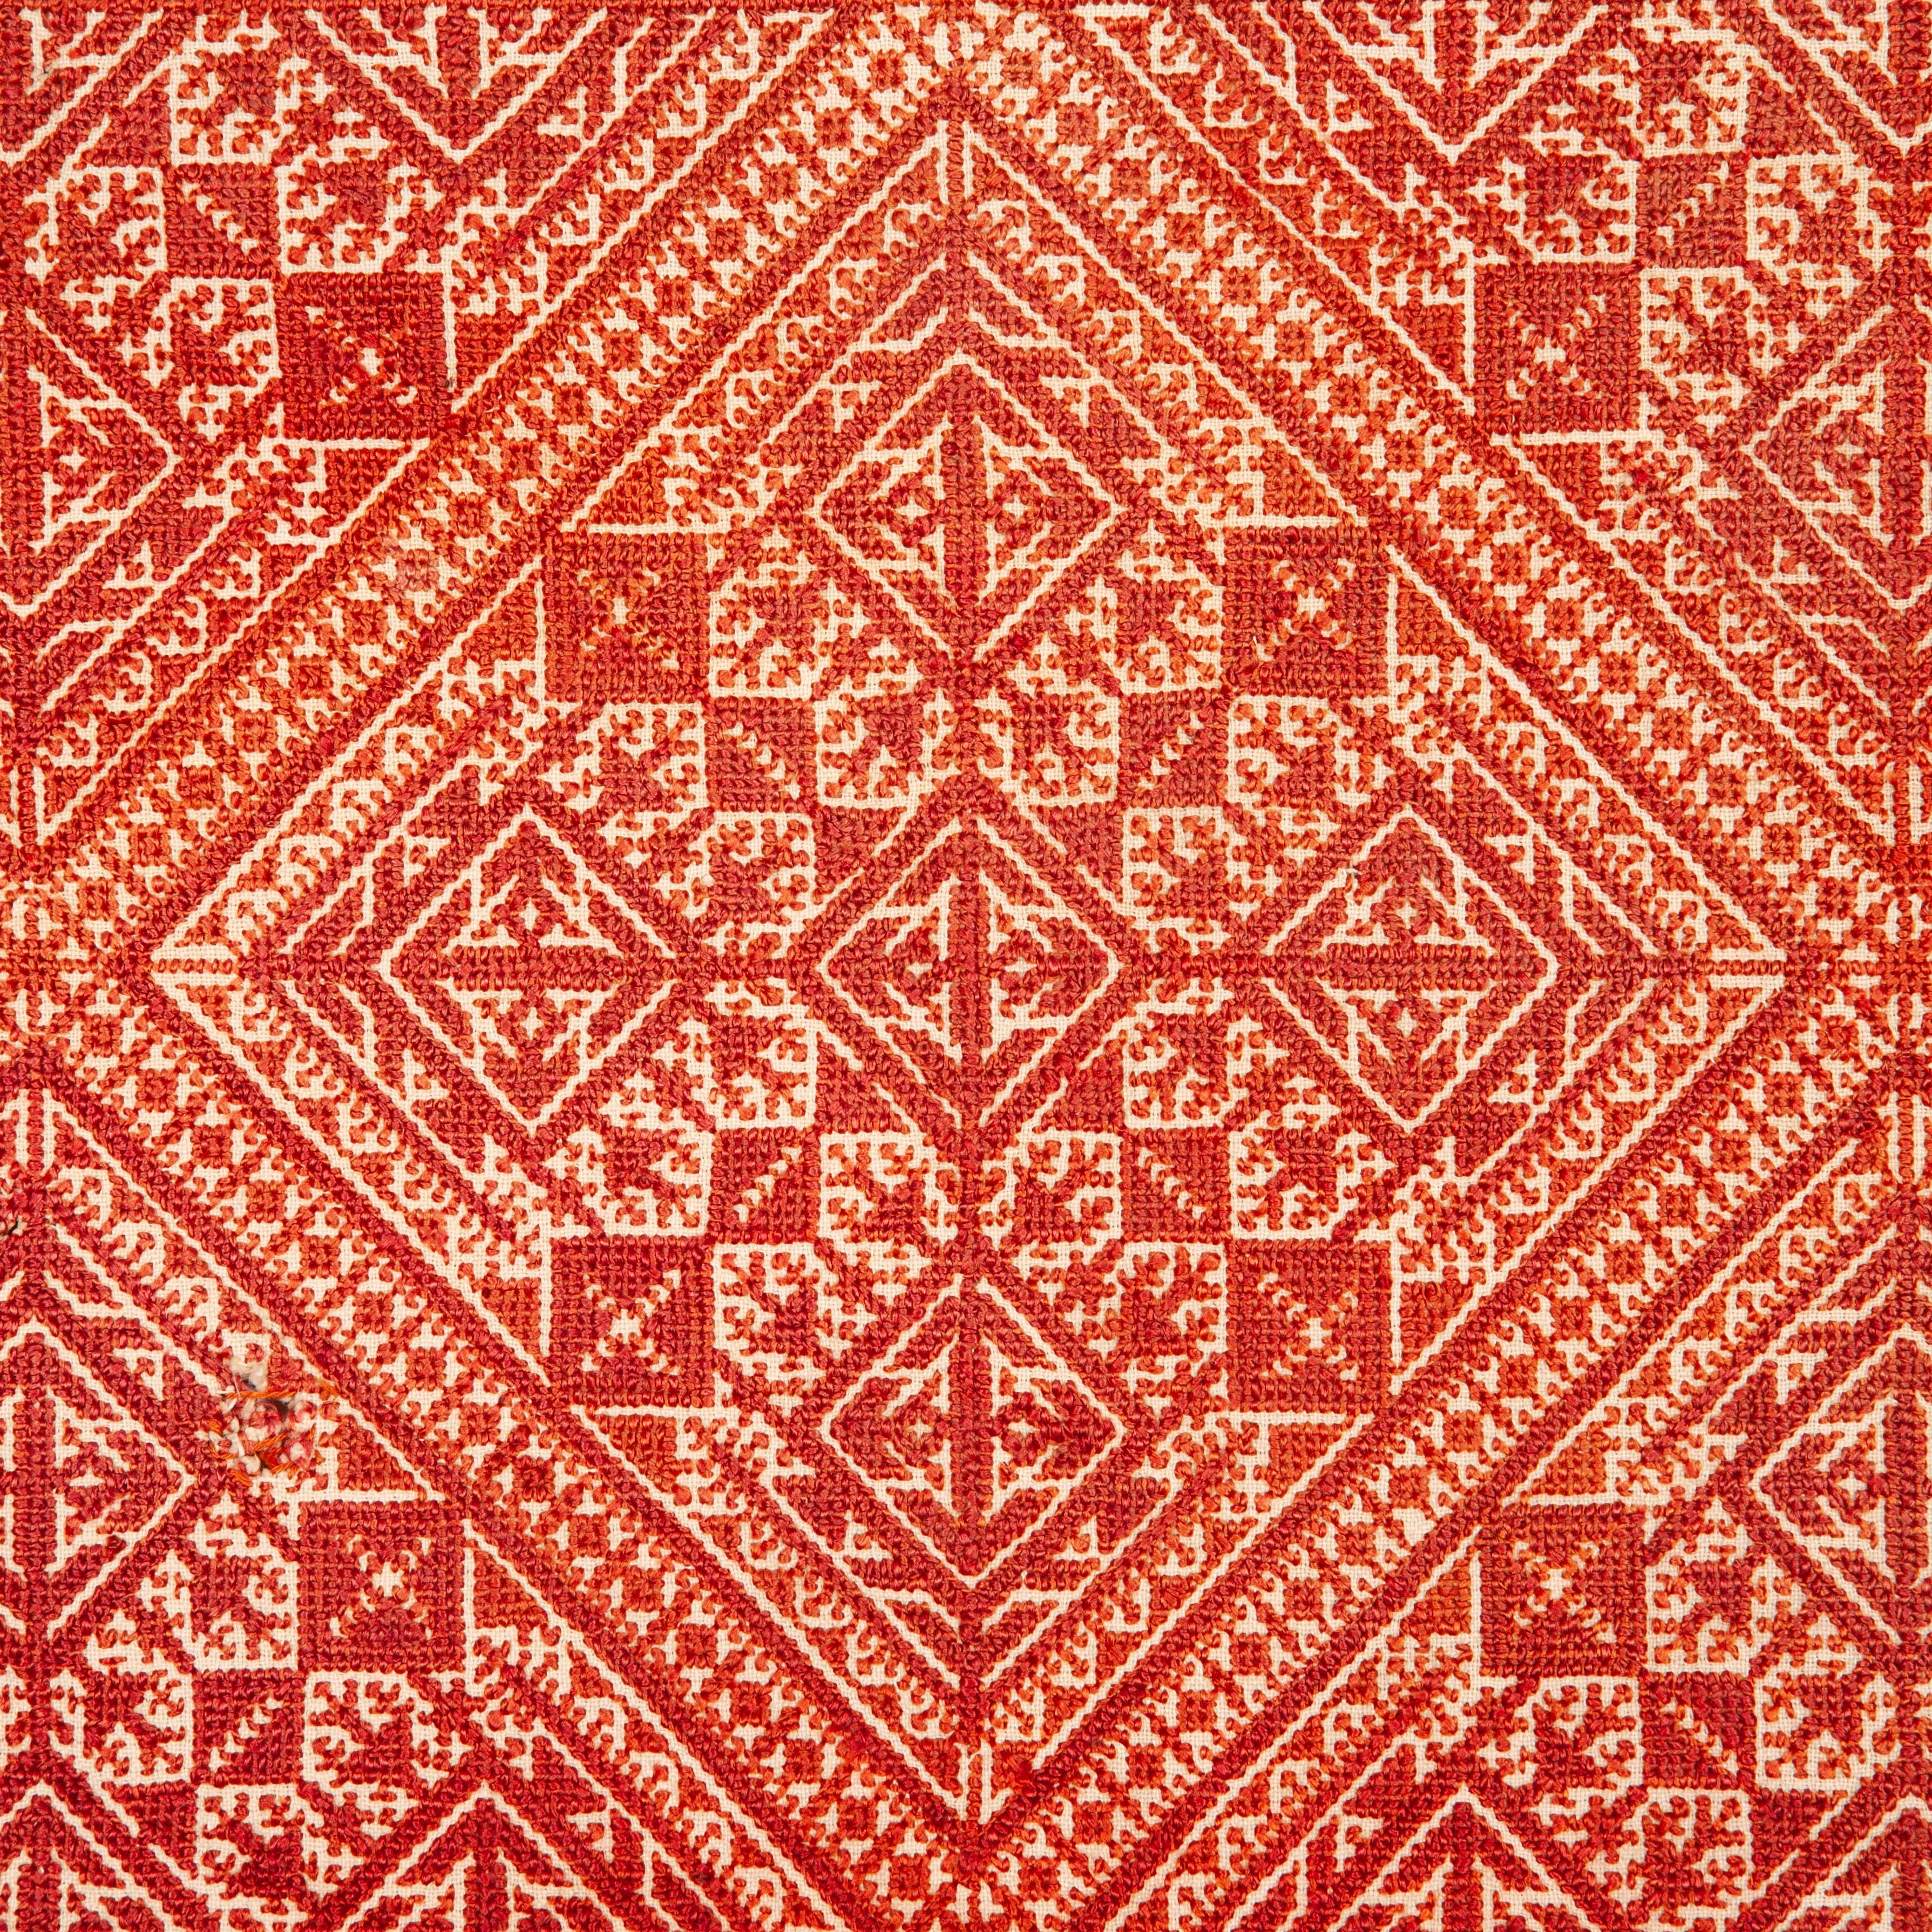 Suzani Antique Fez Embroidery from Morocco, 1900s